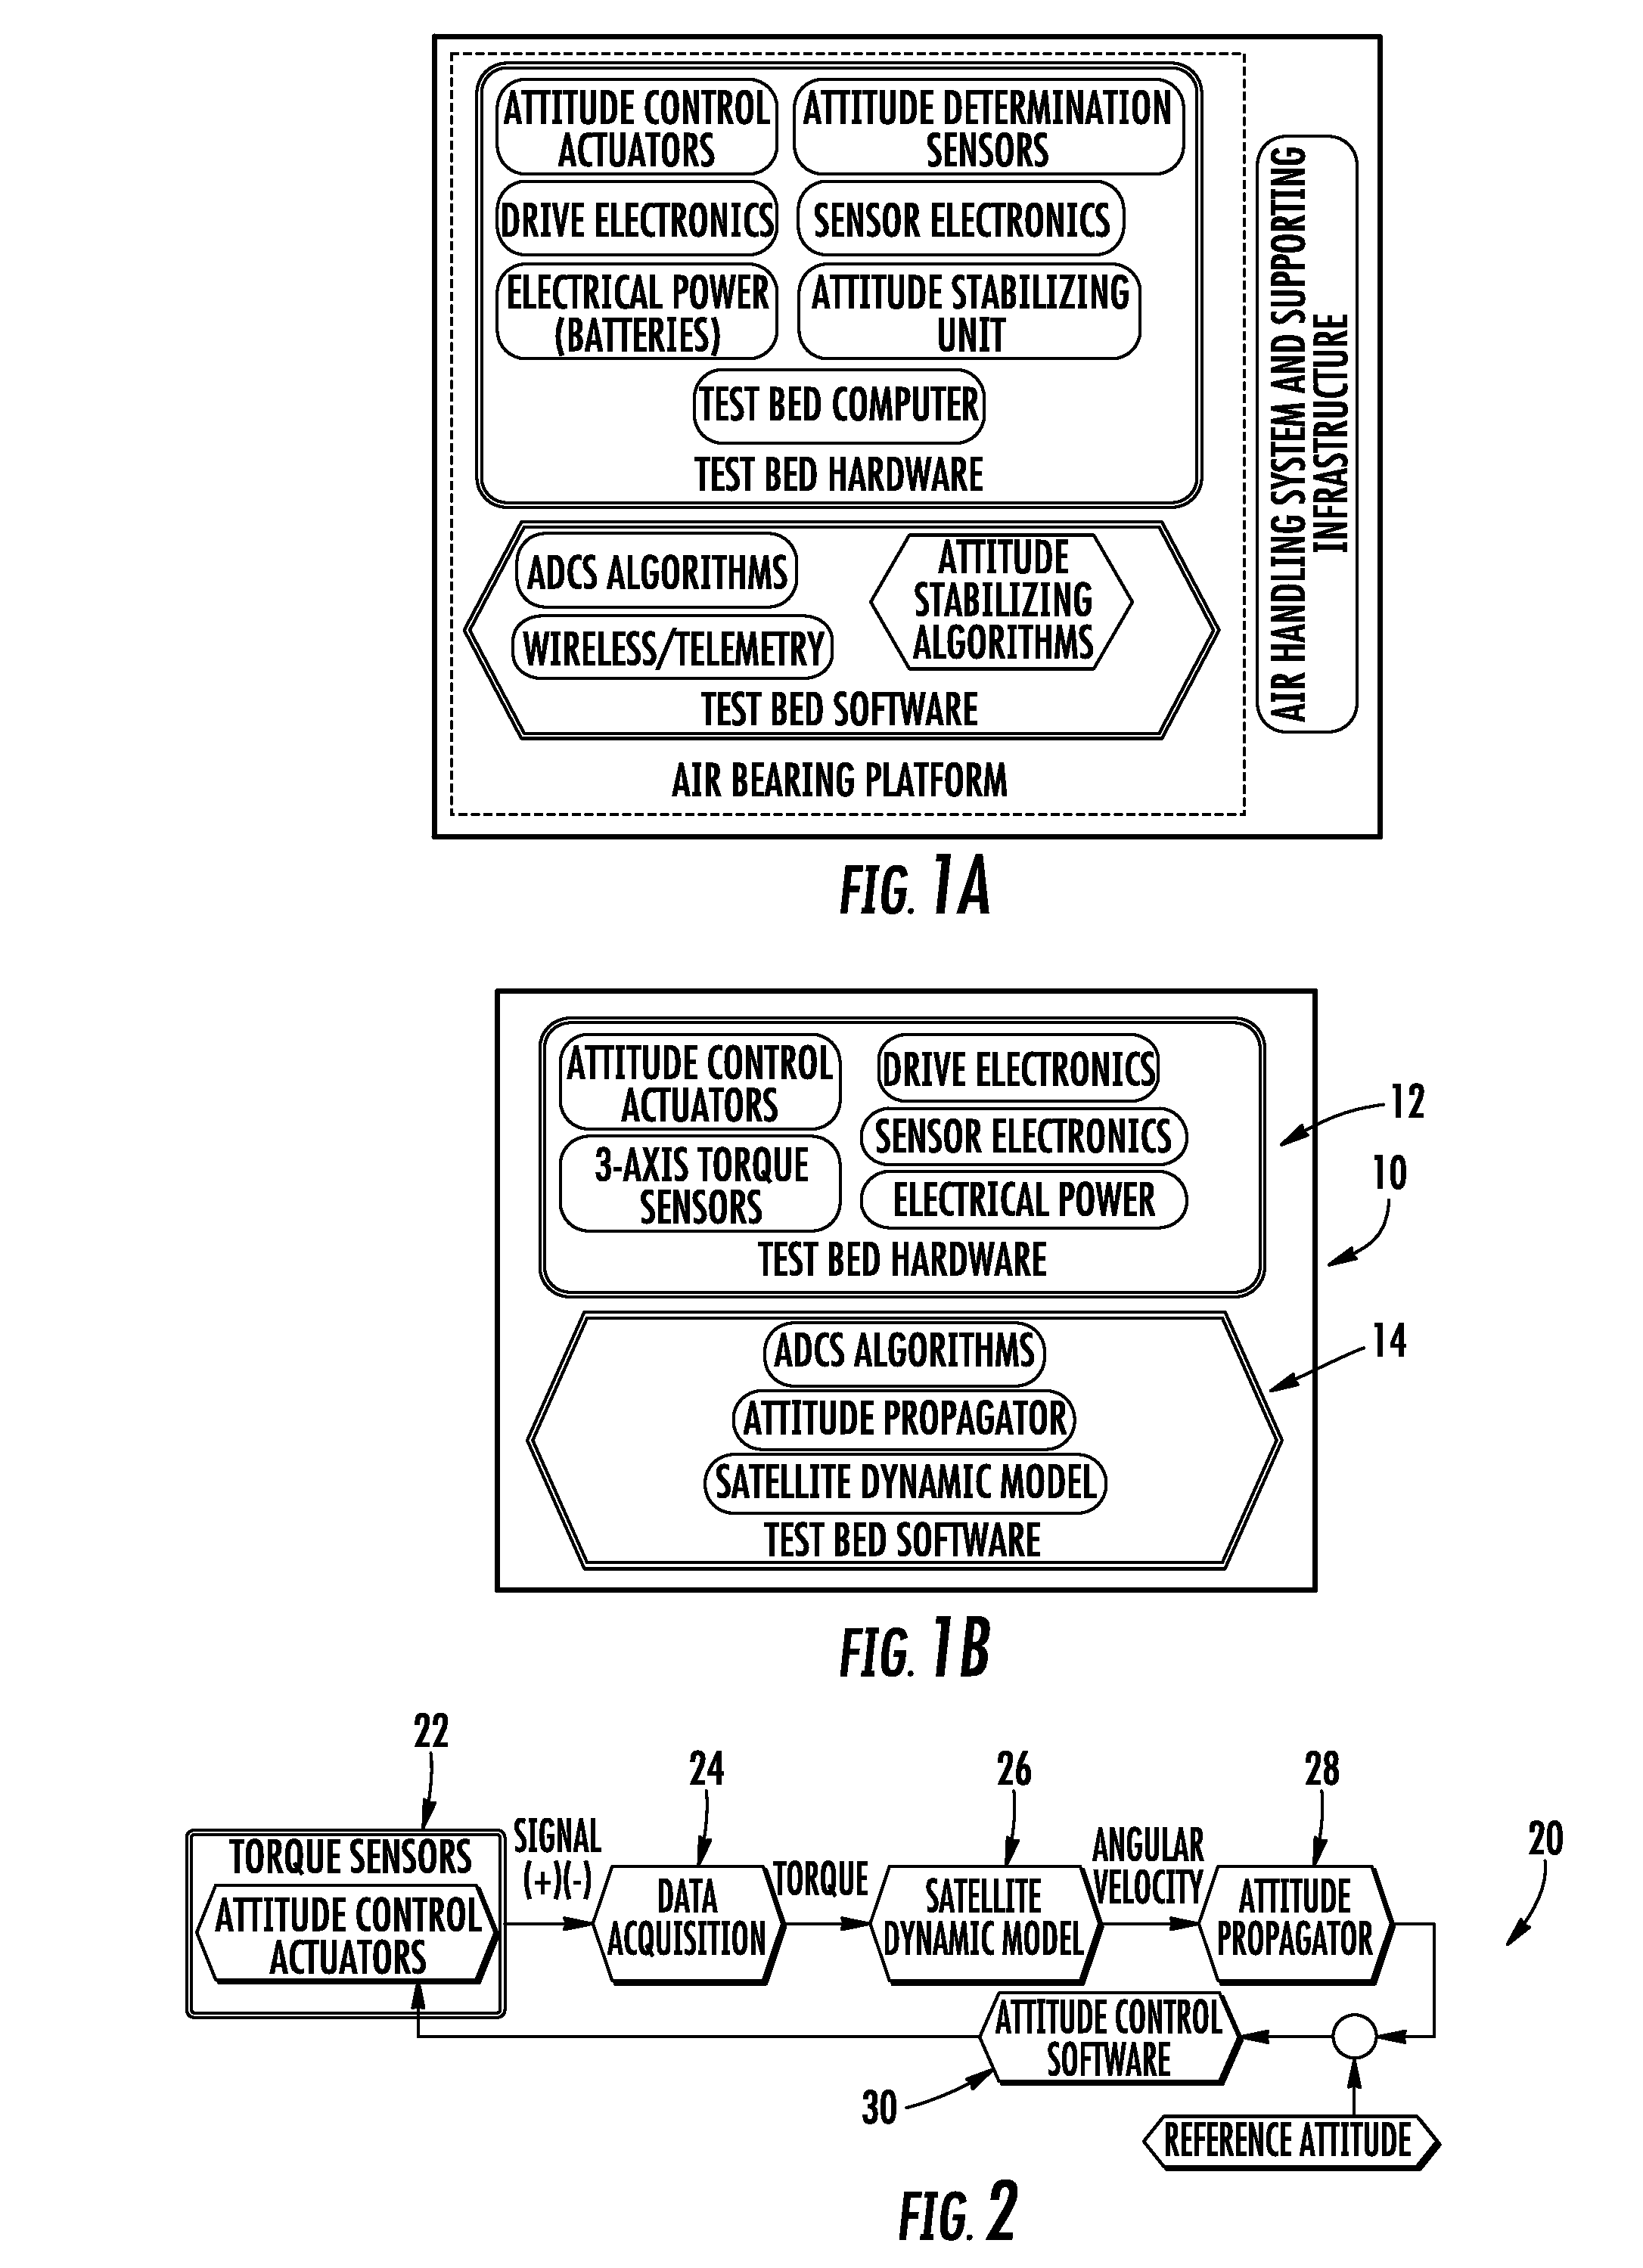 System and method for assessing the performance of an attitude control system for small satellites